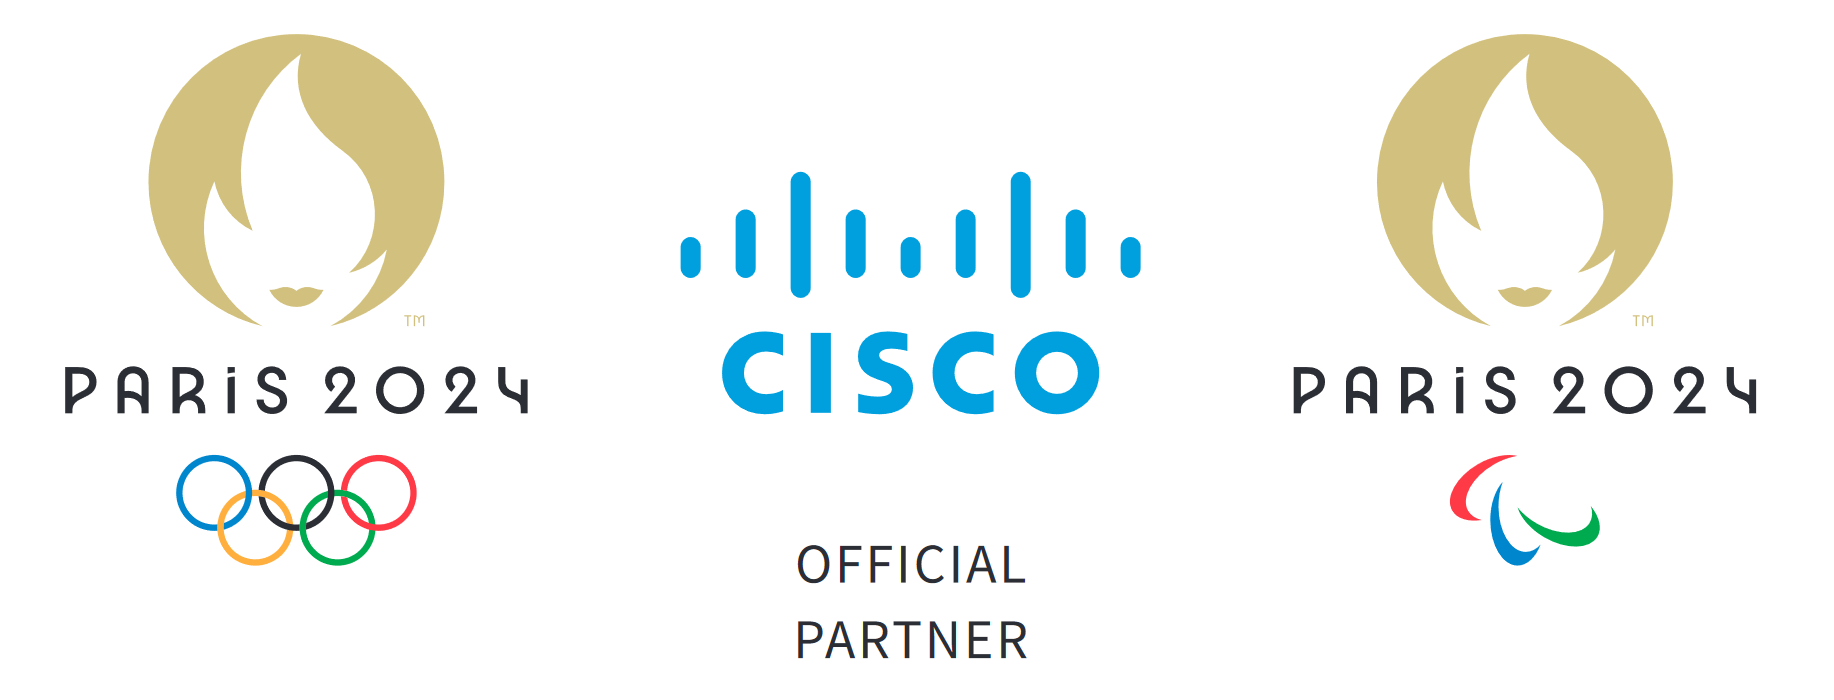 Paris 2024 signs Cisco as third official partner of Olympics and